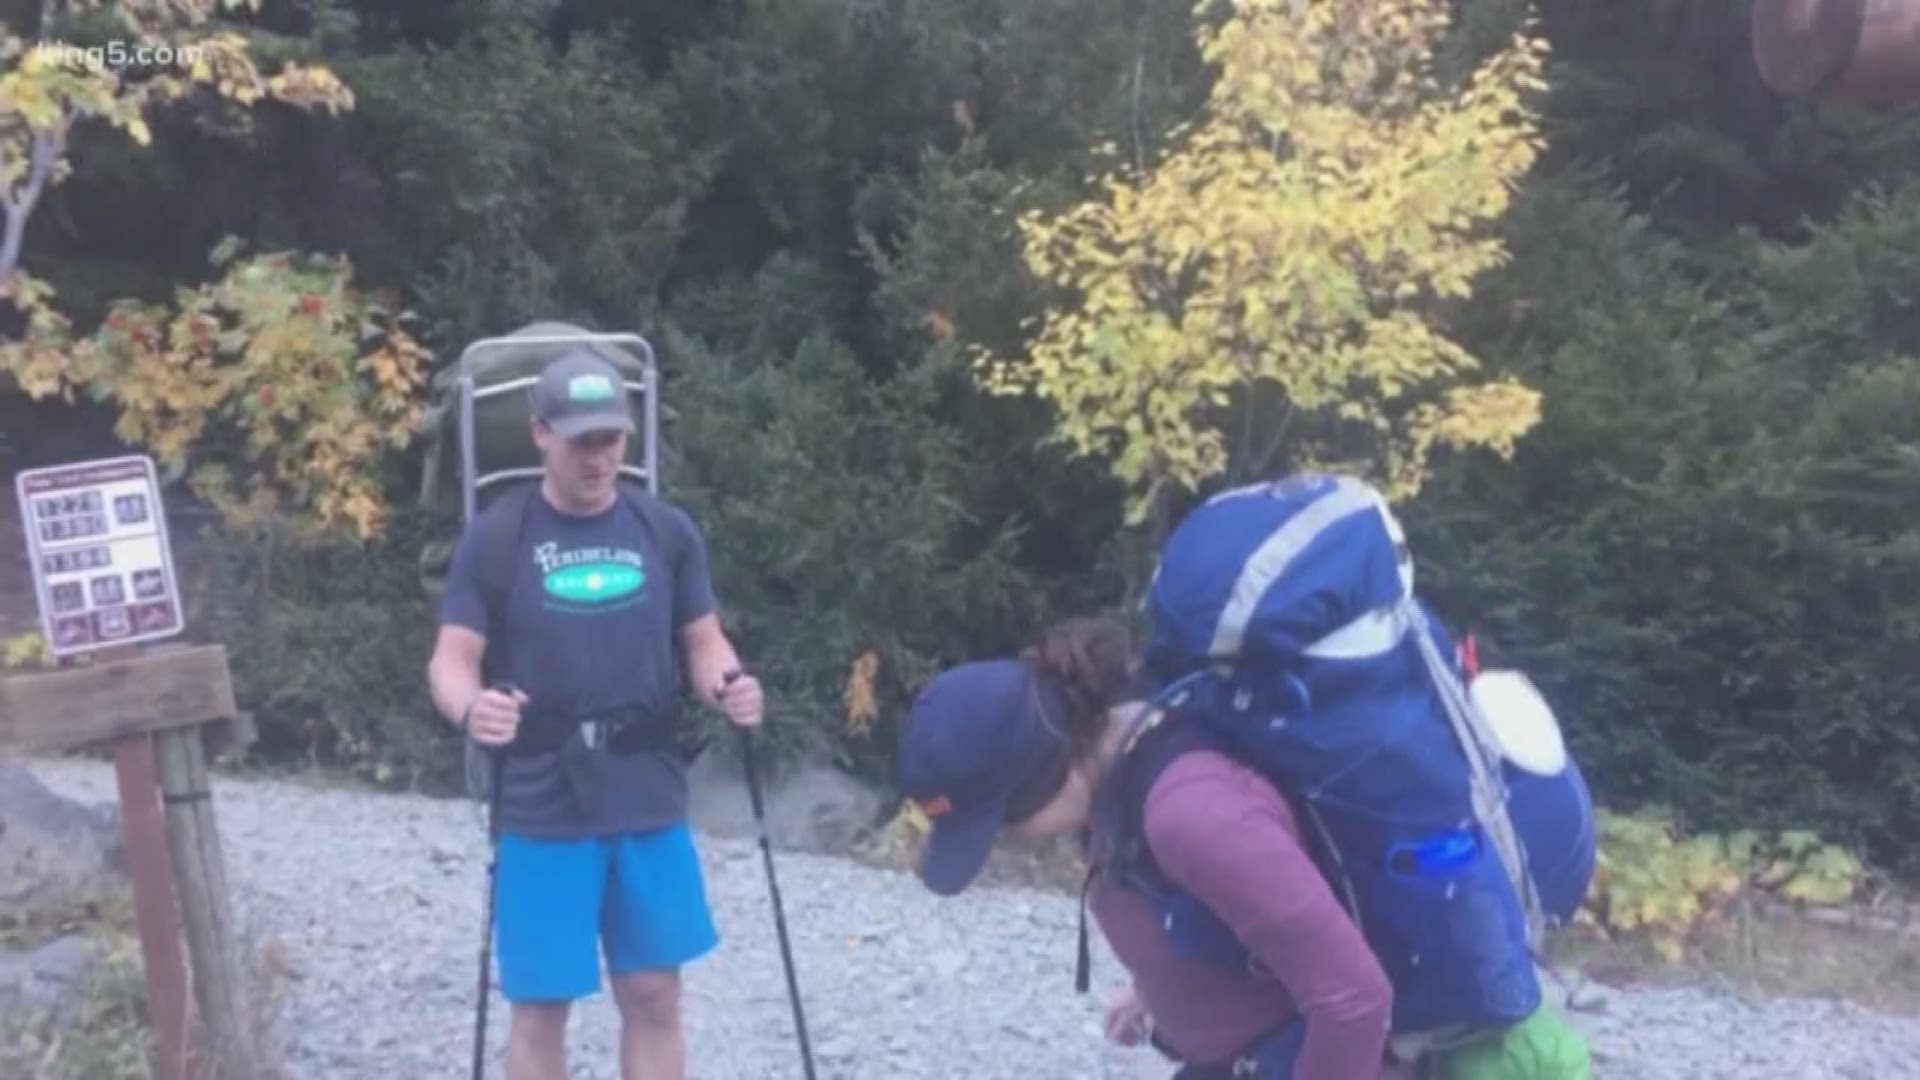 Now that the weather is getting warmer, more and more people will take to the trails throughout Washington. For those who are new to hiking, or new to hiking in Washington, KING 5's Ben Dery explains some of the unwritten rules of hiking etiquette.